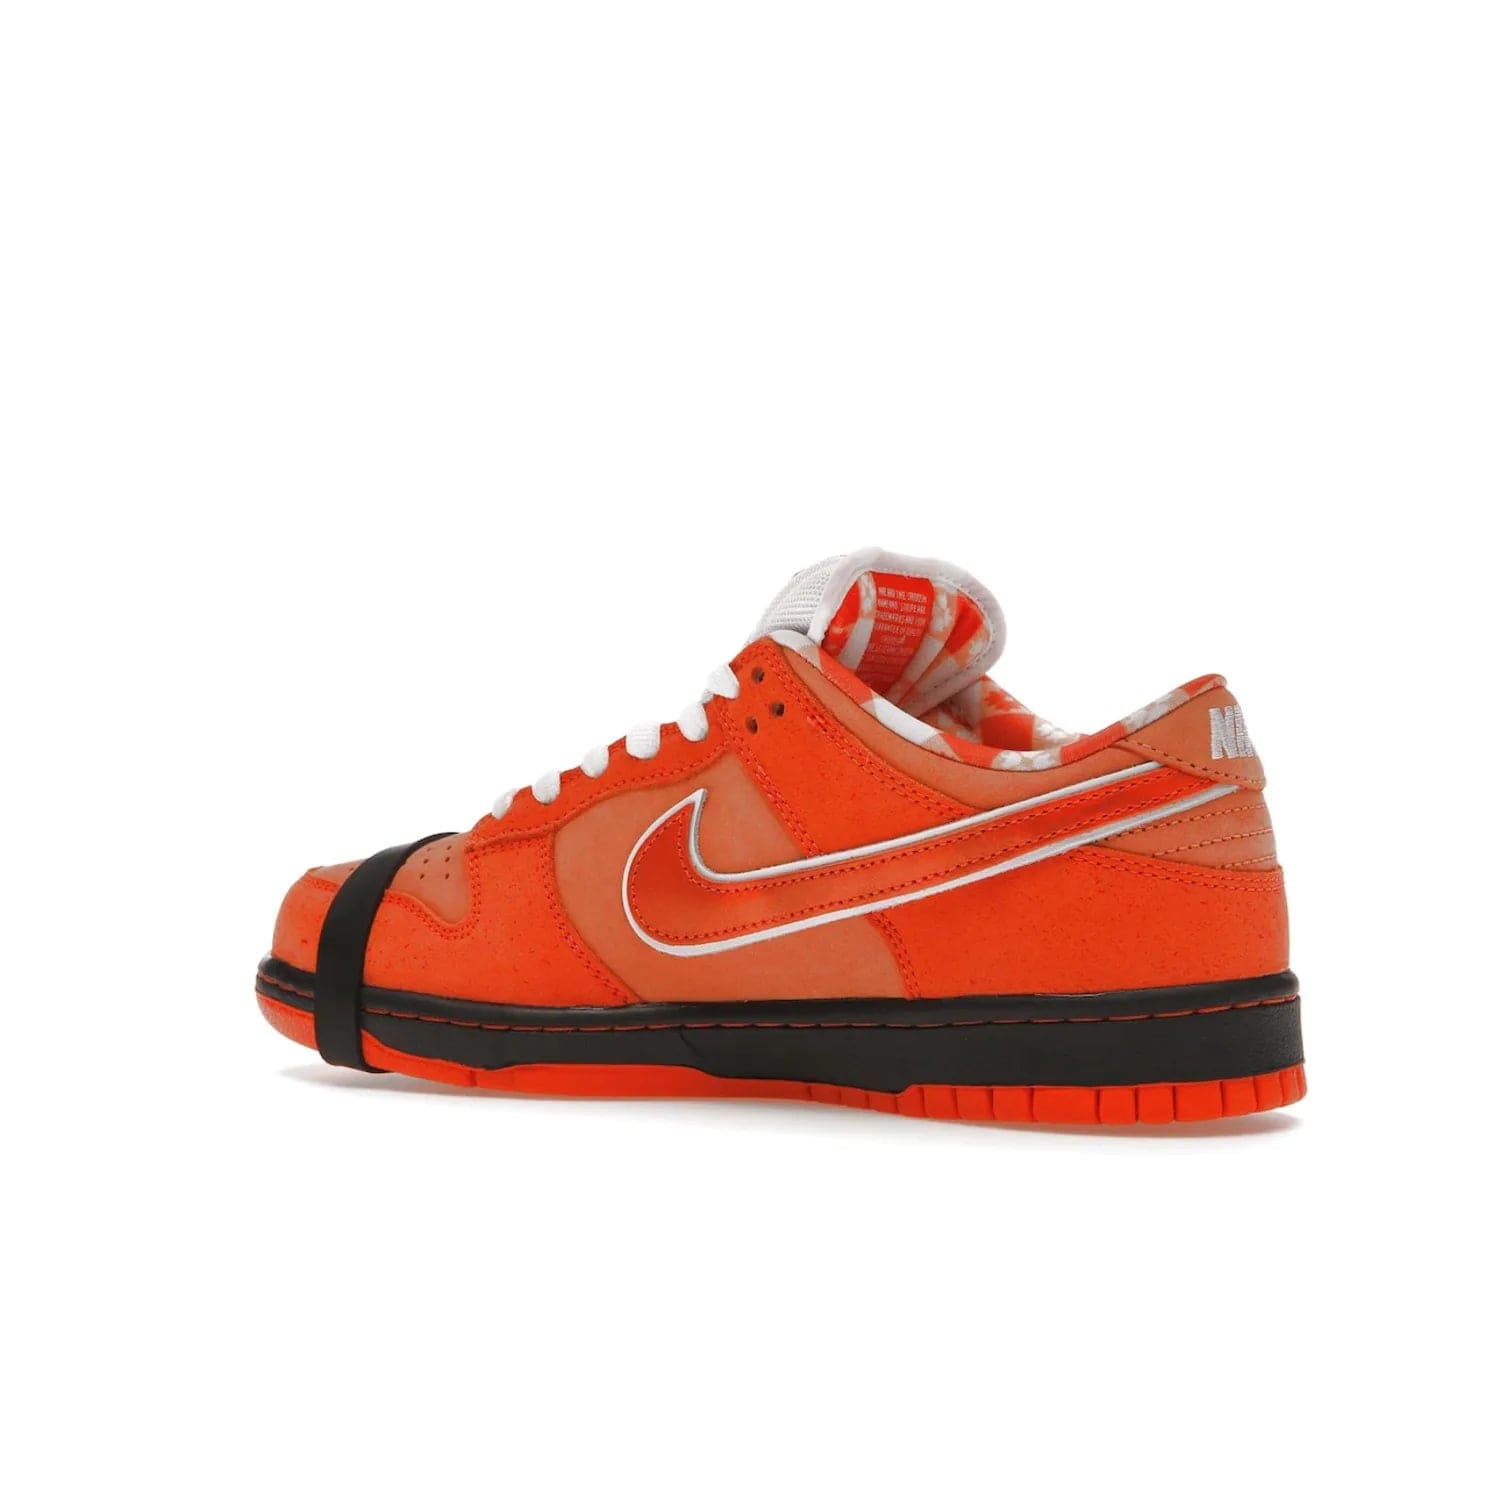 Nike SB Dunk Low Concepts Orange Lobster - Image 22 - Only at www.BallersClubKickz.com - Make a statement with the Nike SB Dunk Low Concepts Orange Lobster. Variety of orange hues, nubuck upper, bib-inspired lining & rubber outsole create bold look & comfortable blend of style. Available December 20th, 2022.